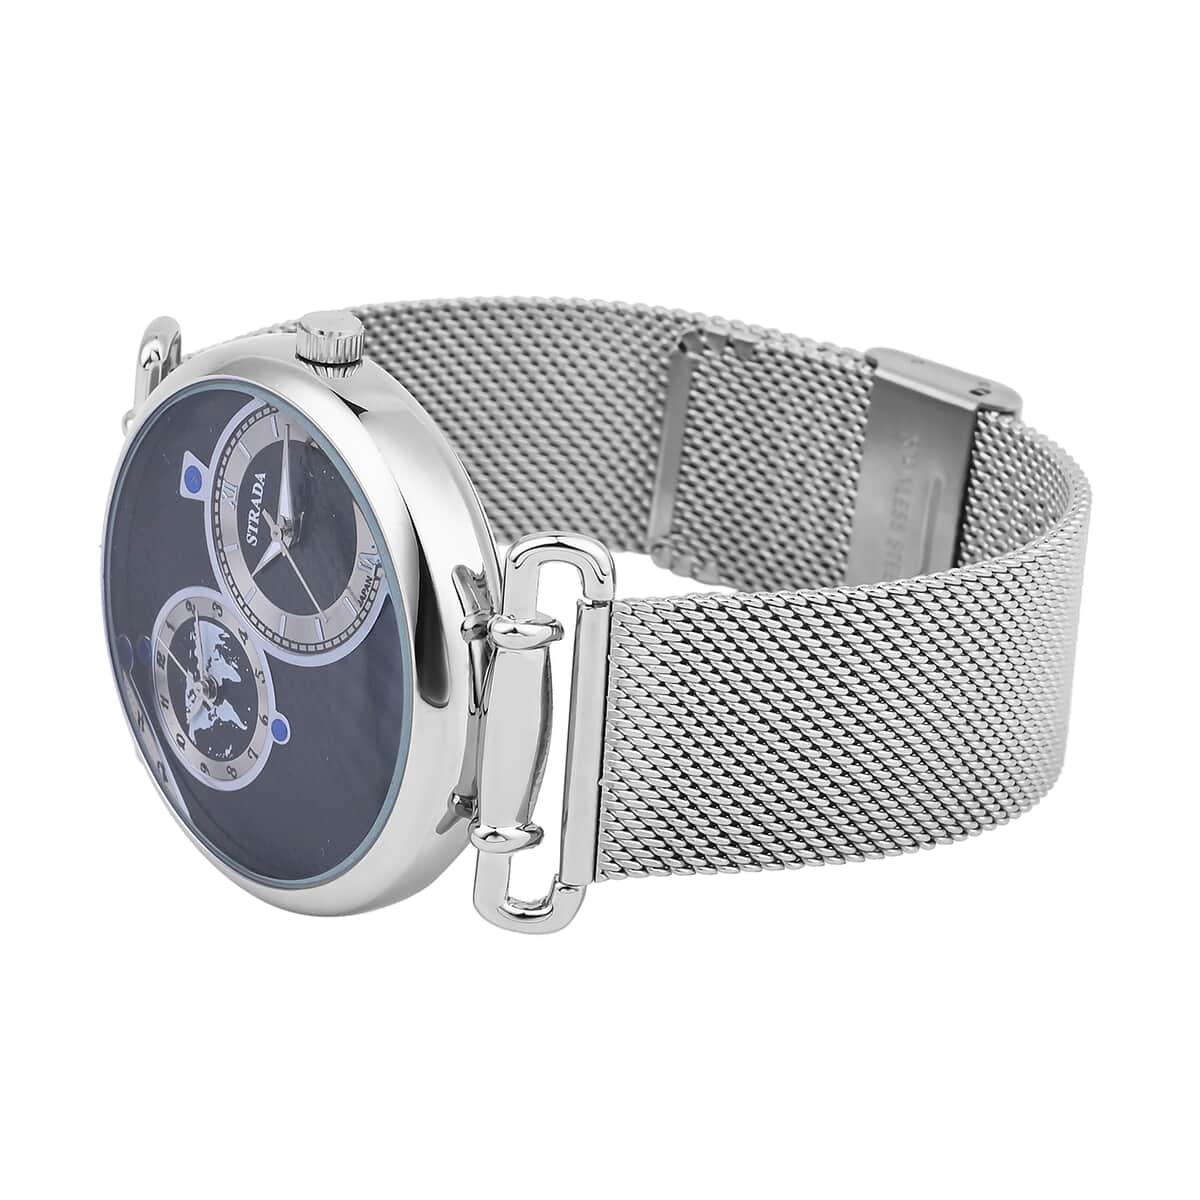 STRADA Double Japanese Movement Watch with Stainless Steel Mesh Strap (44mm), Dual Time Zones image number 4